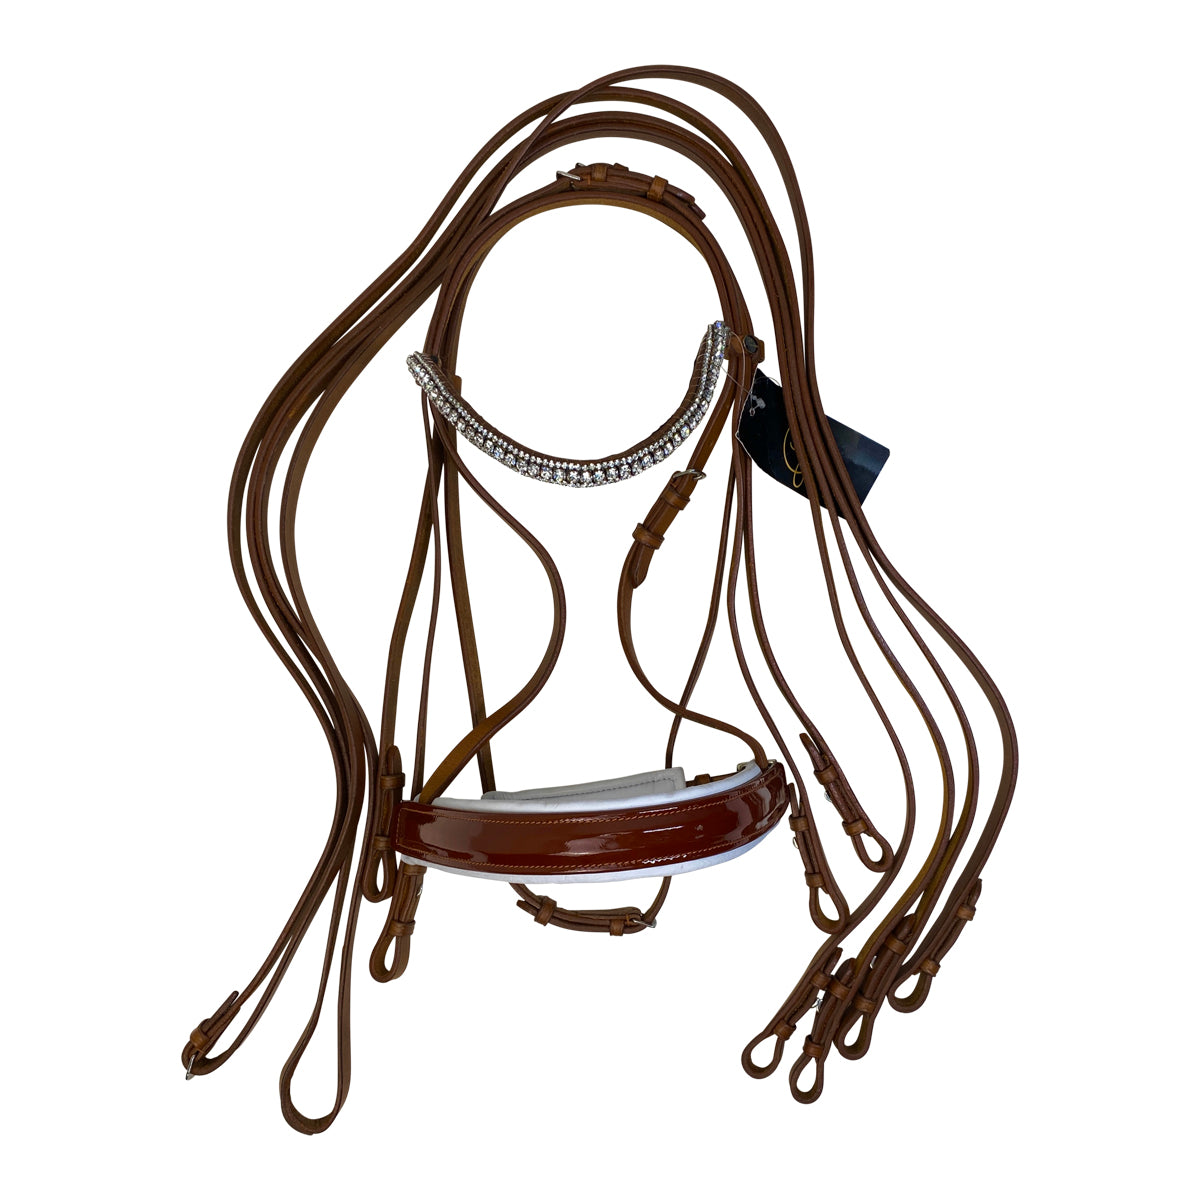 Premiera 'Prades' Double Bridle w/ Crystal Browband and Reins in Cognac/White Padding